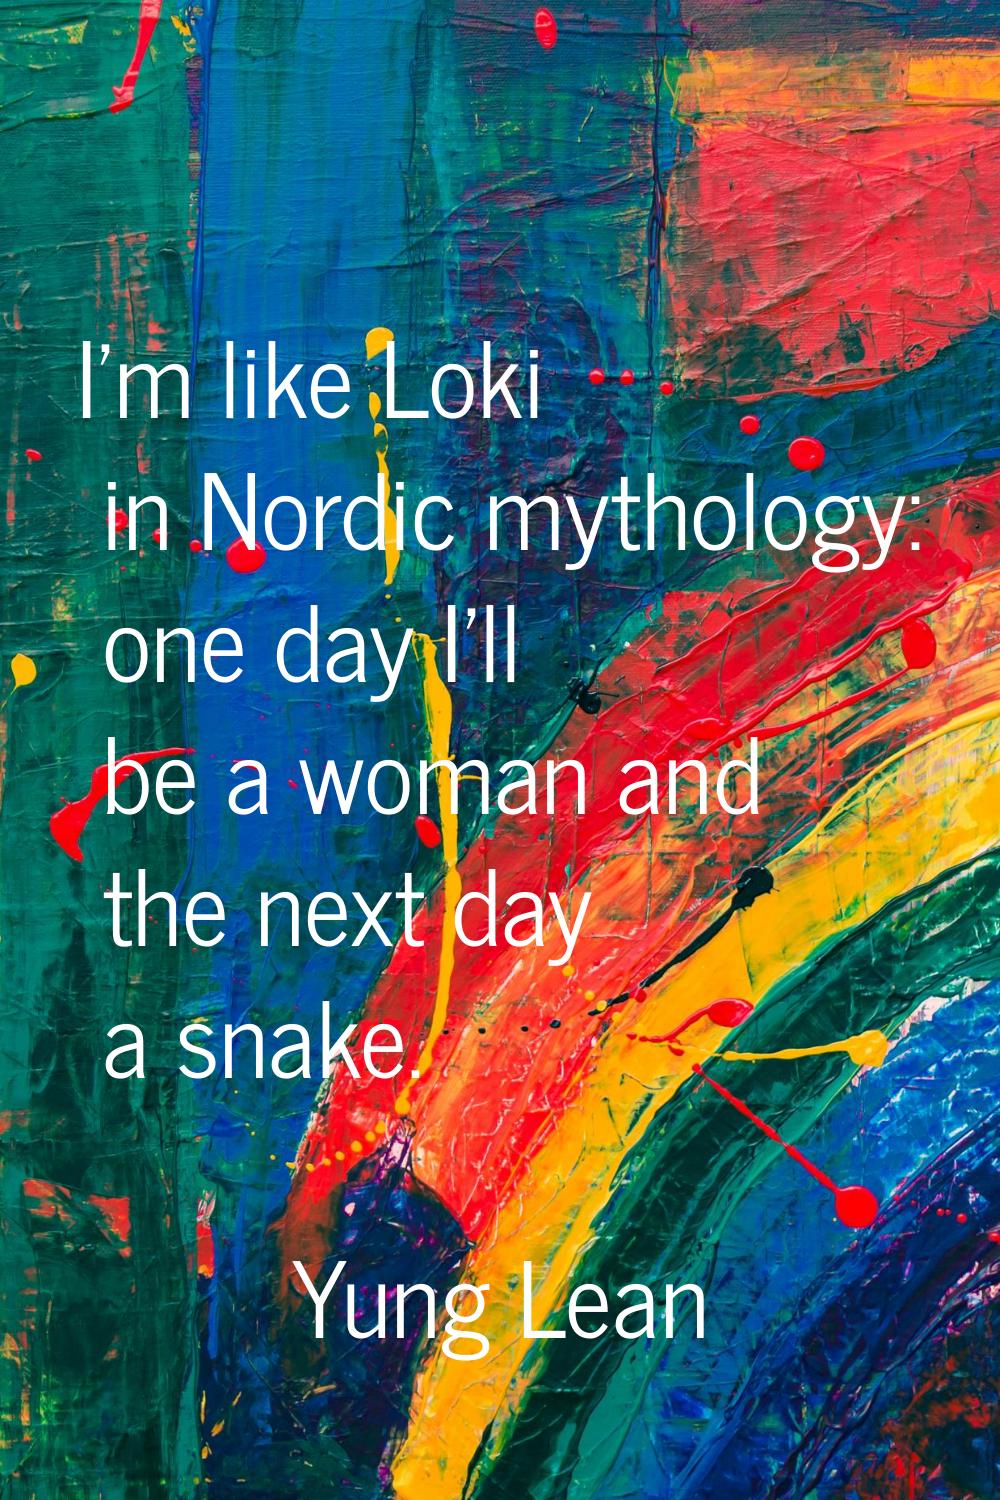 I'm like Loki in Nordic mythology: one day I'll be a woman and the next day a snake.